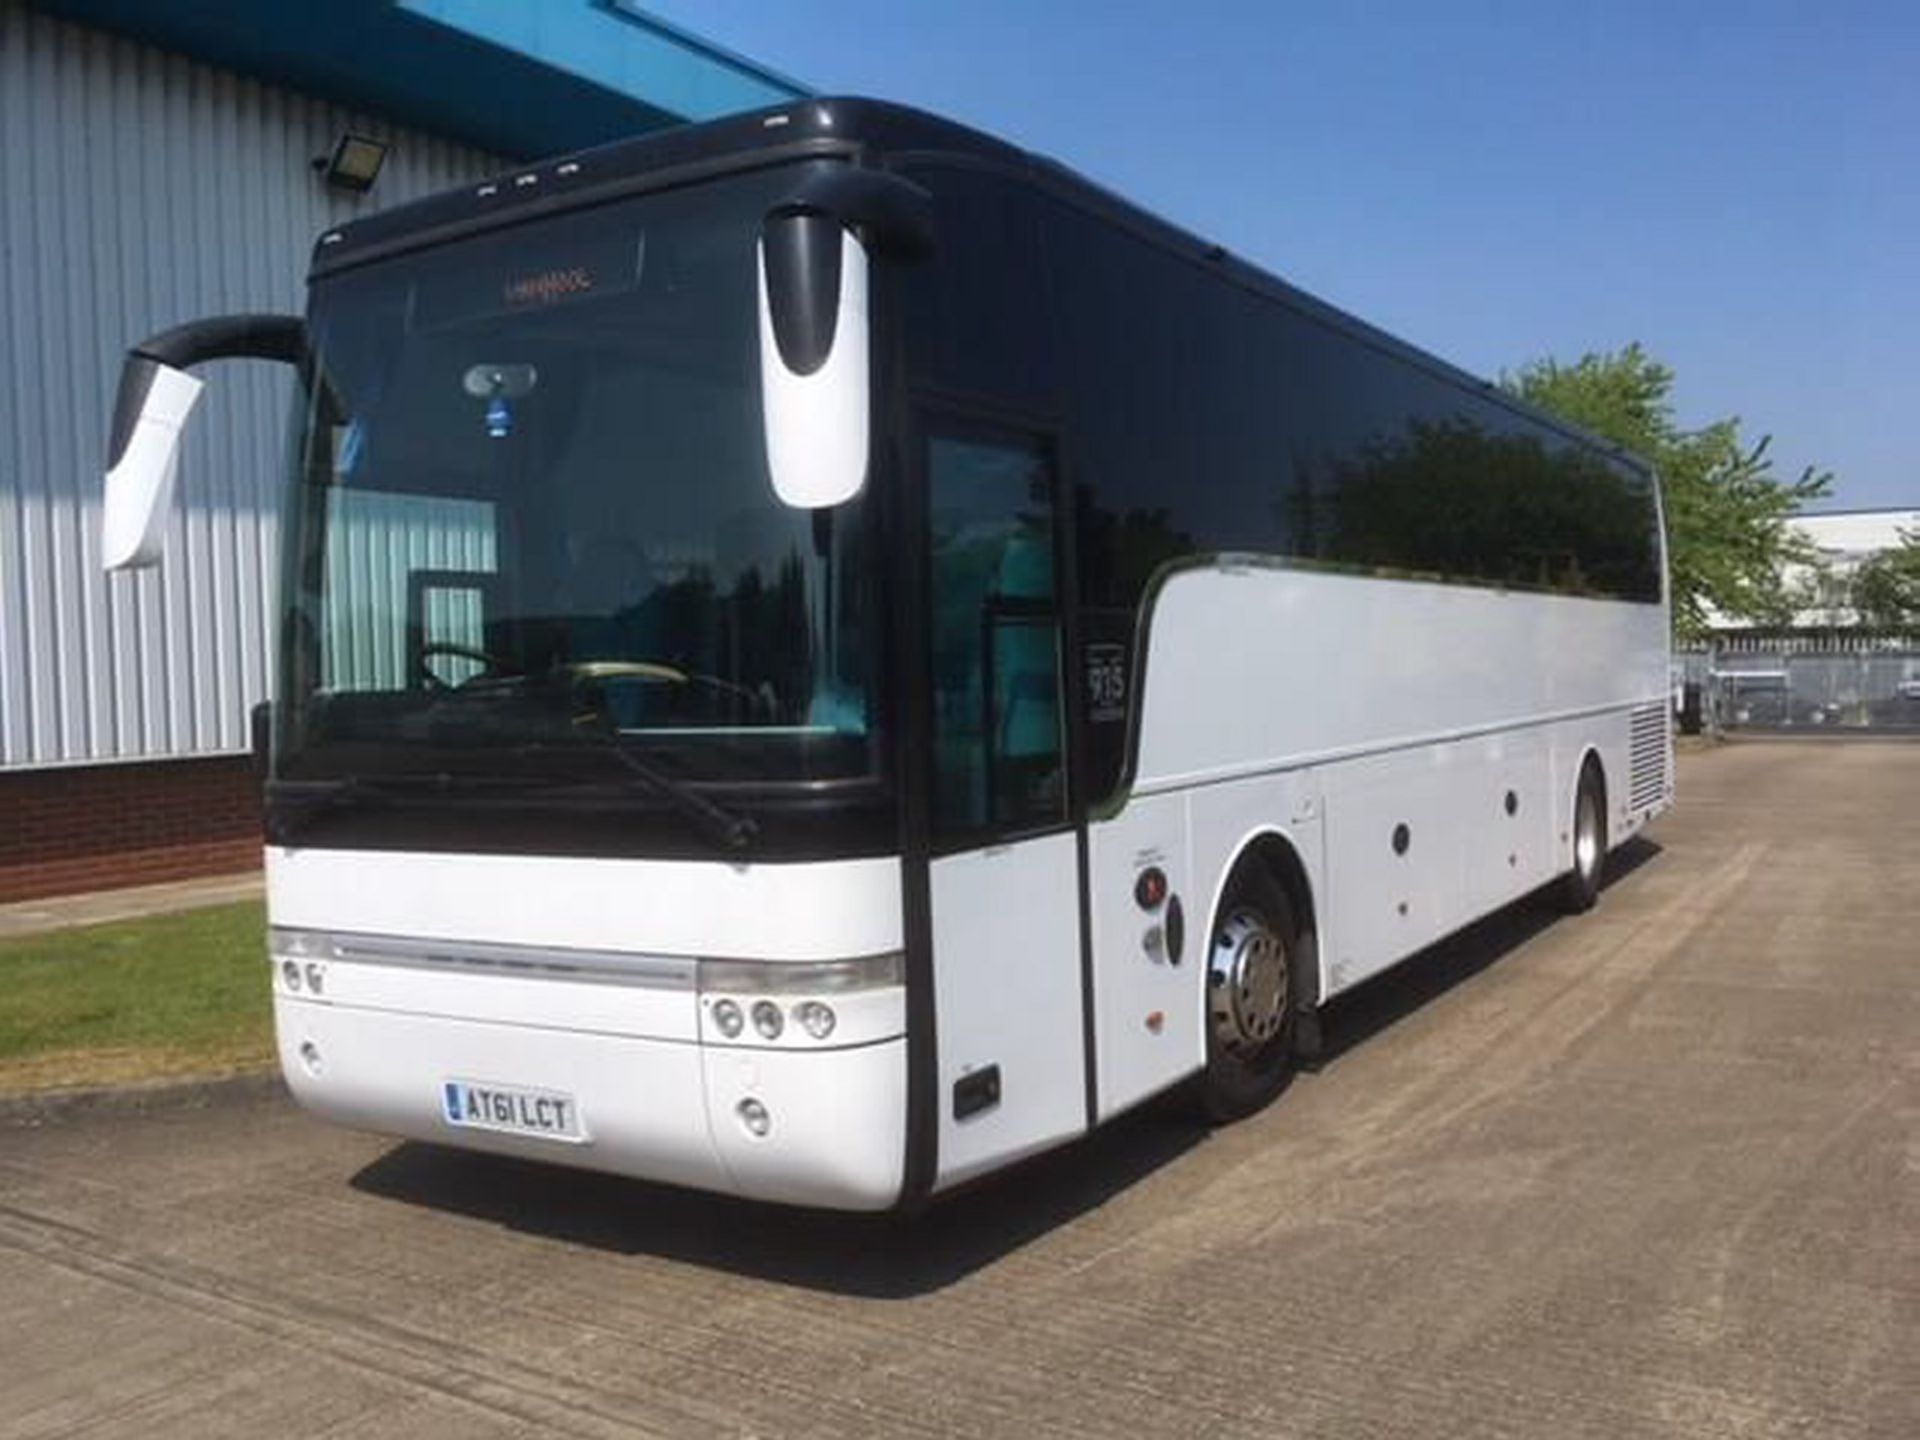 MAN Van Hool T915 Alicron, Registration AT61 LCT. First registered 01-09-2011, Length: 12.2m, Seats: